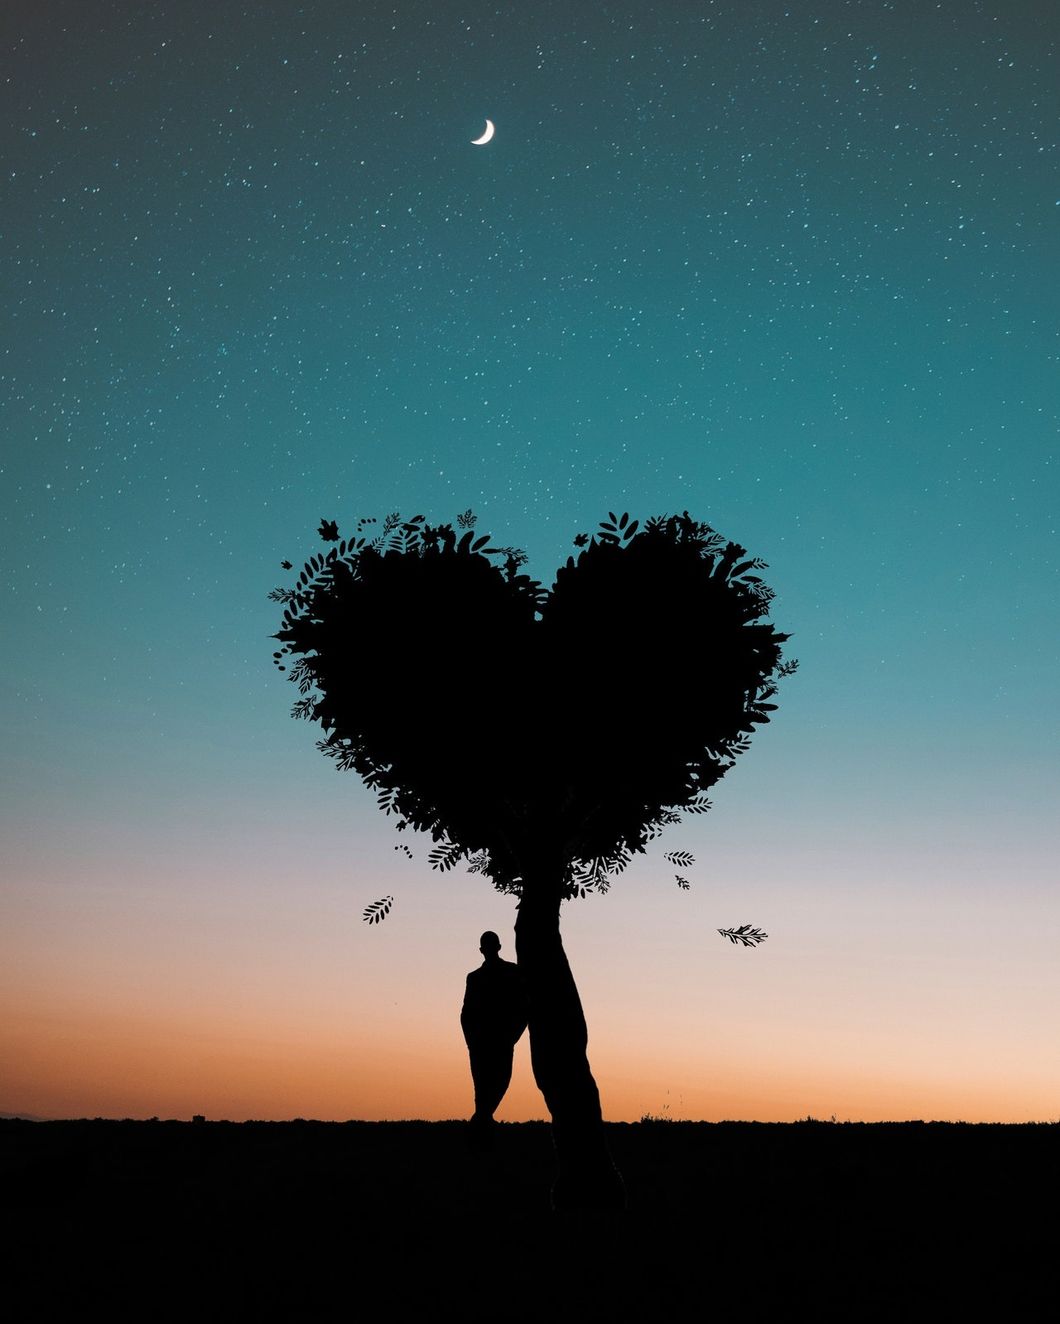 https://www.pexels.com/photo/silhouette-photo-of-man-leaning-on-heart-shaped-tree-744667/